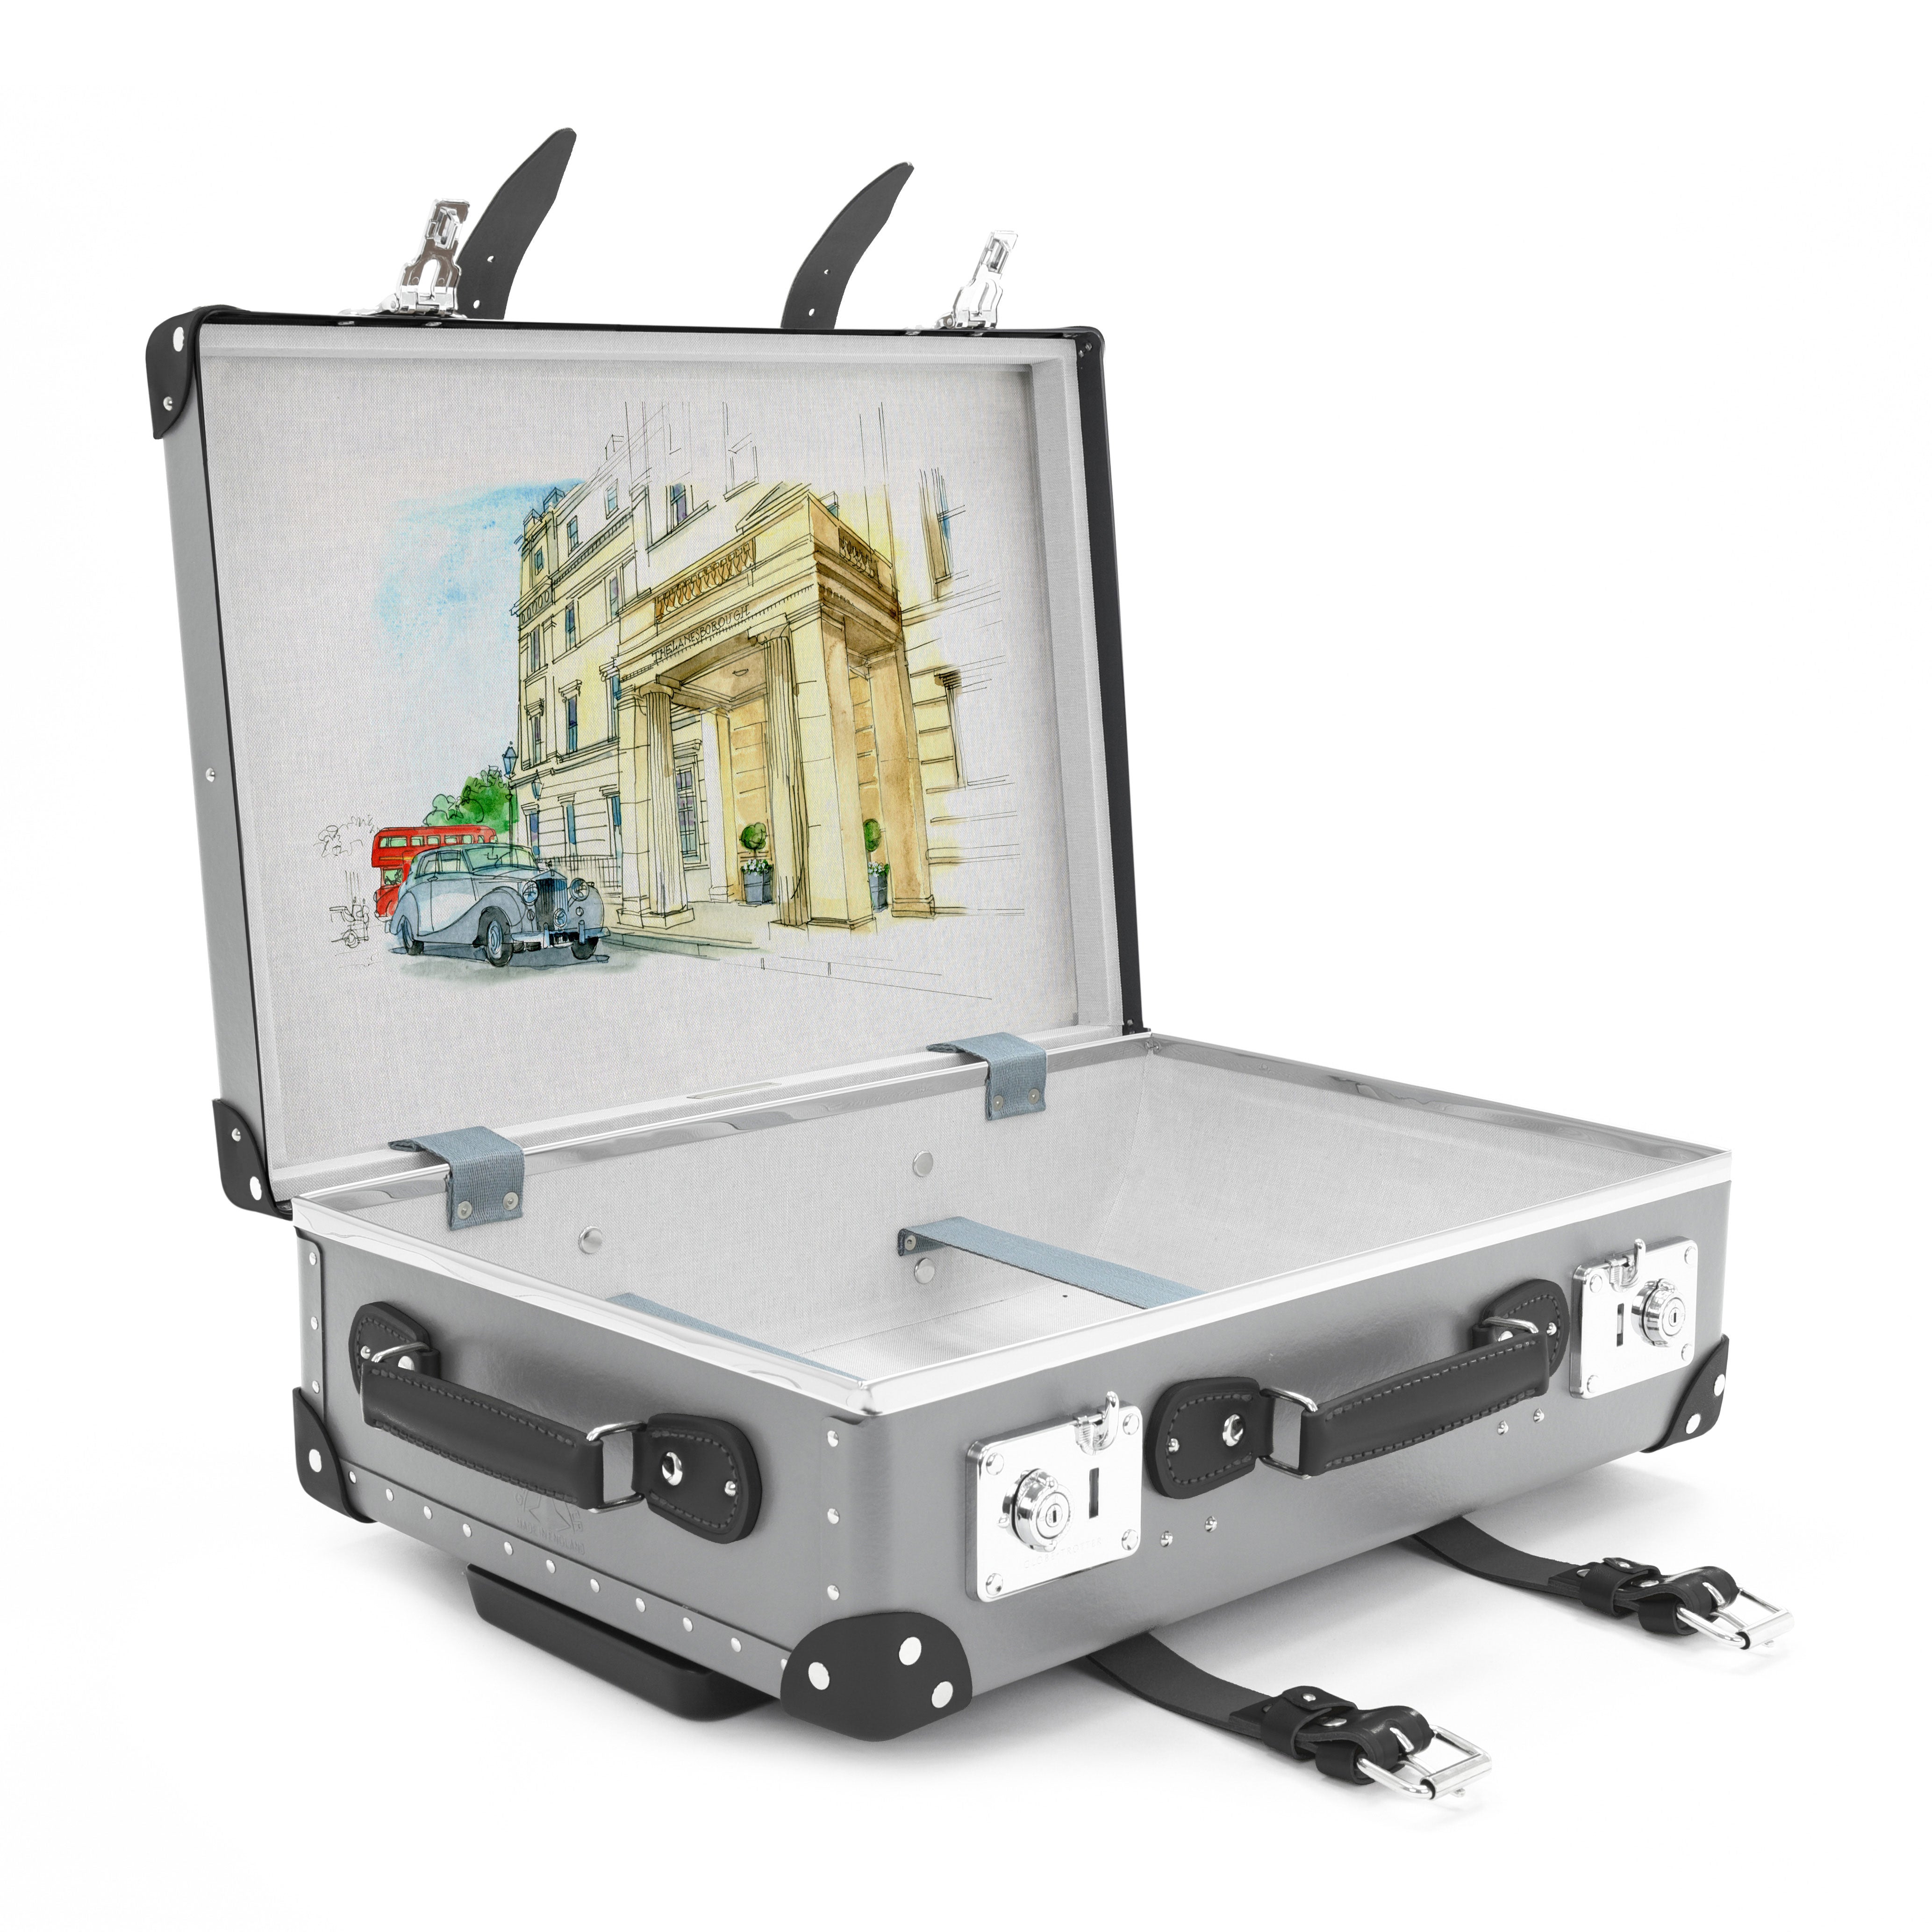 Globe-Trotter The Lanesborough Suitcase - Oekter Collection Hotels Boutique